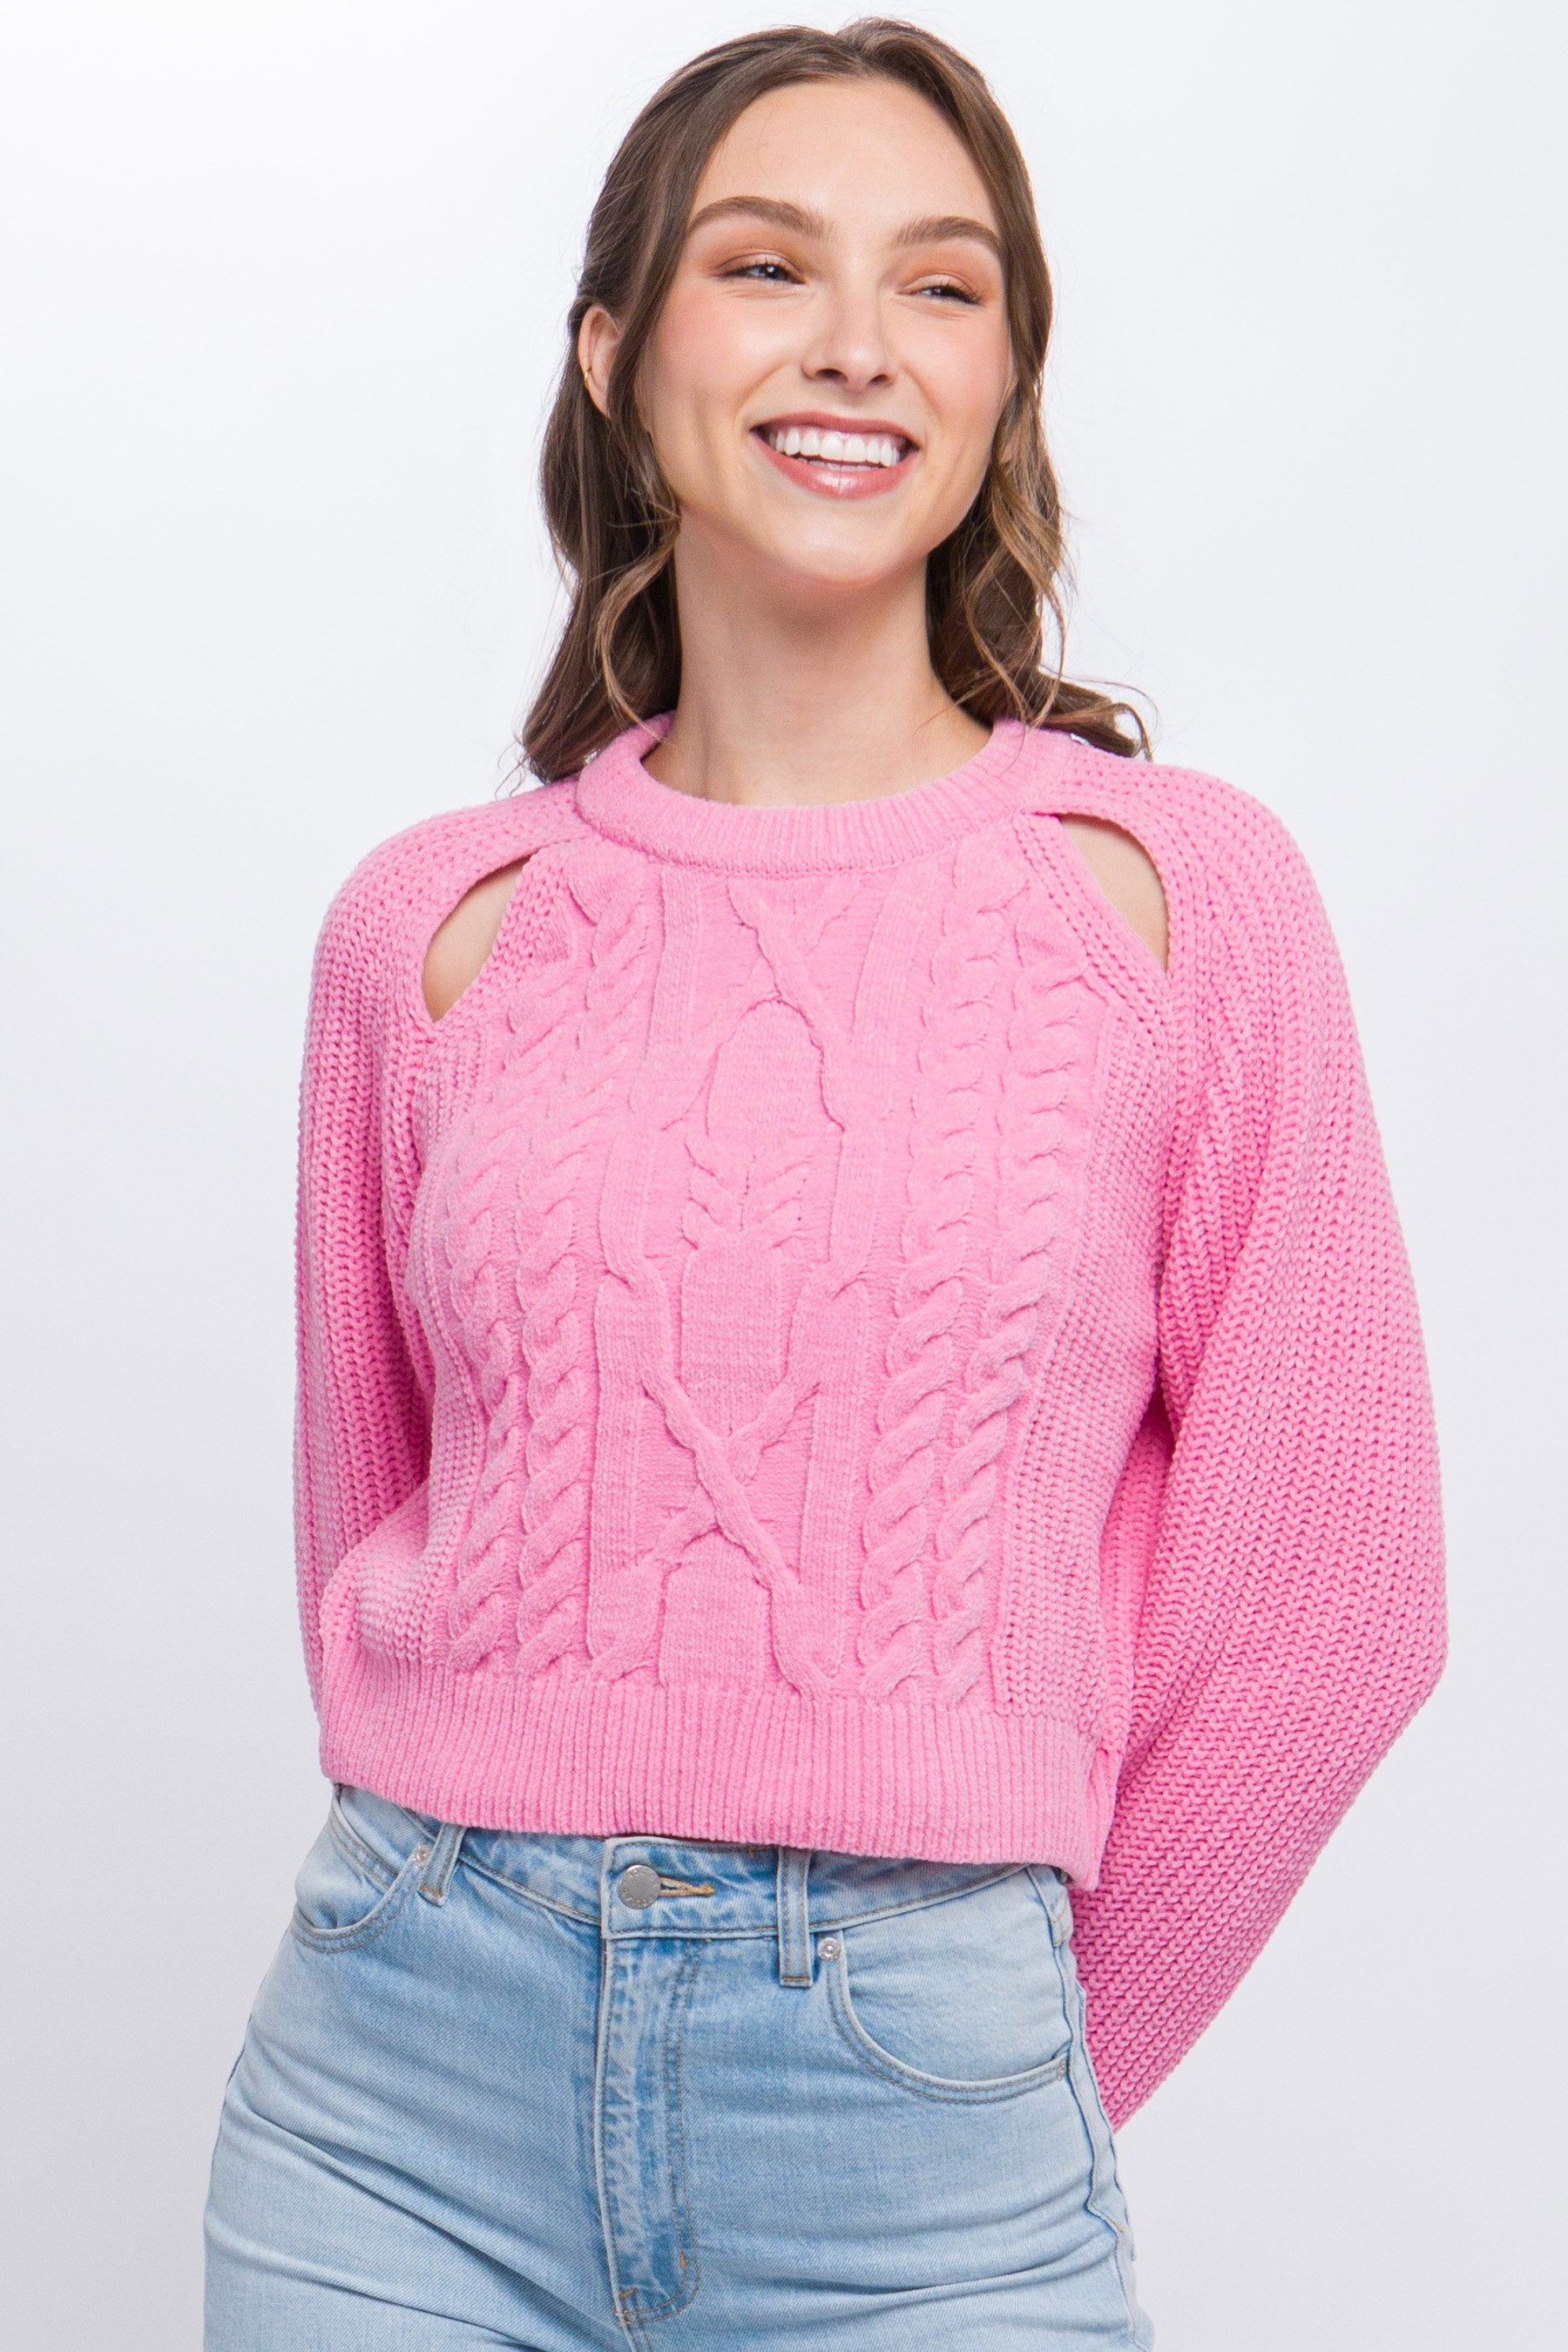 Knit Pullover Sweater With Cold Shoulder Detail - Tigbuls Variety Fashion